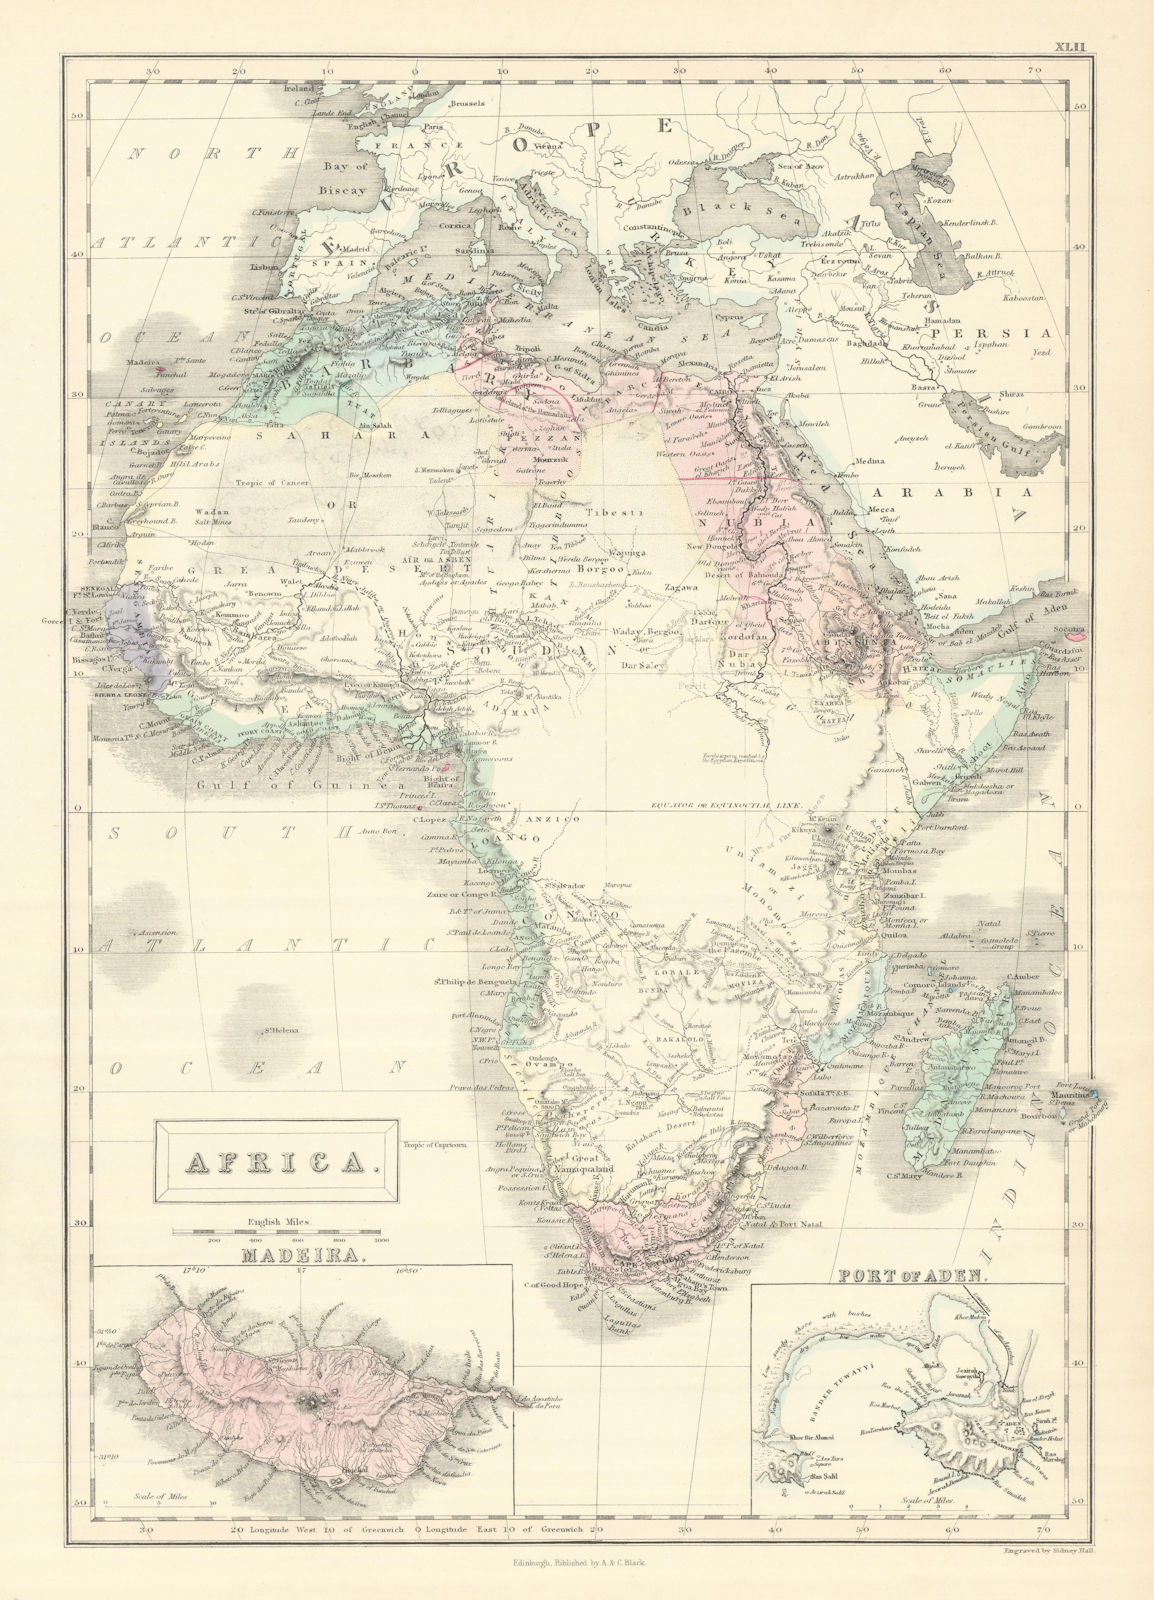 Early colonial Africa. Inset Madeira & Aden. SIDNEY HALL 1854 old antique map